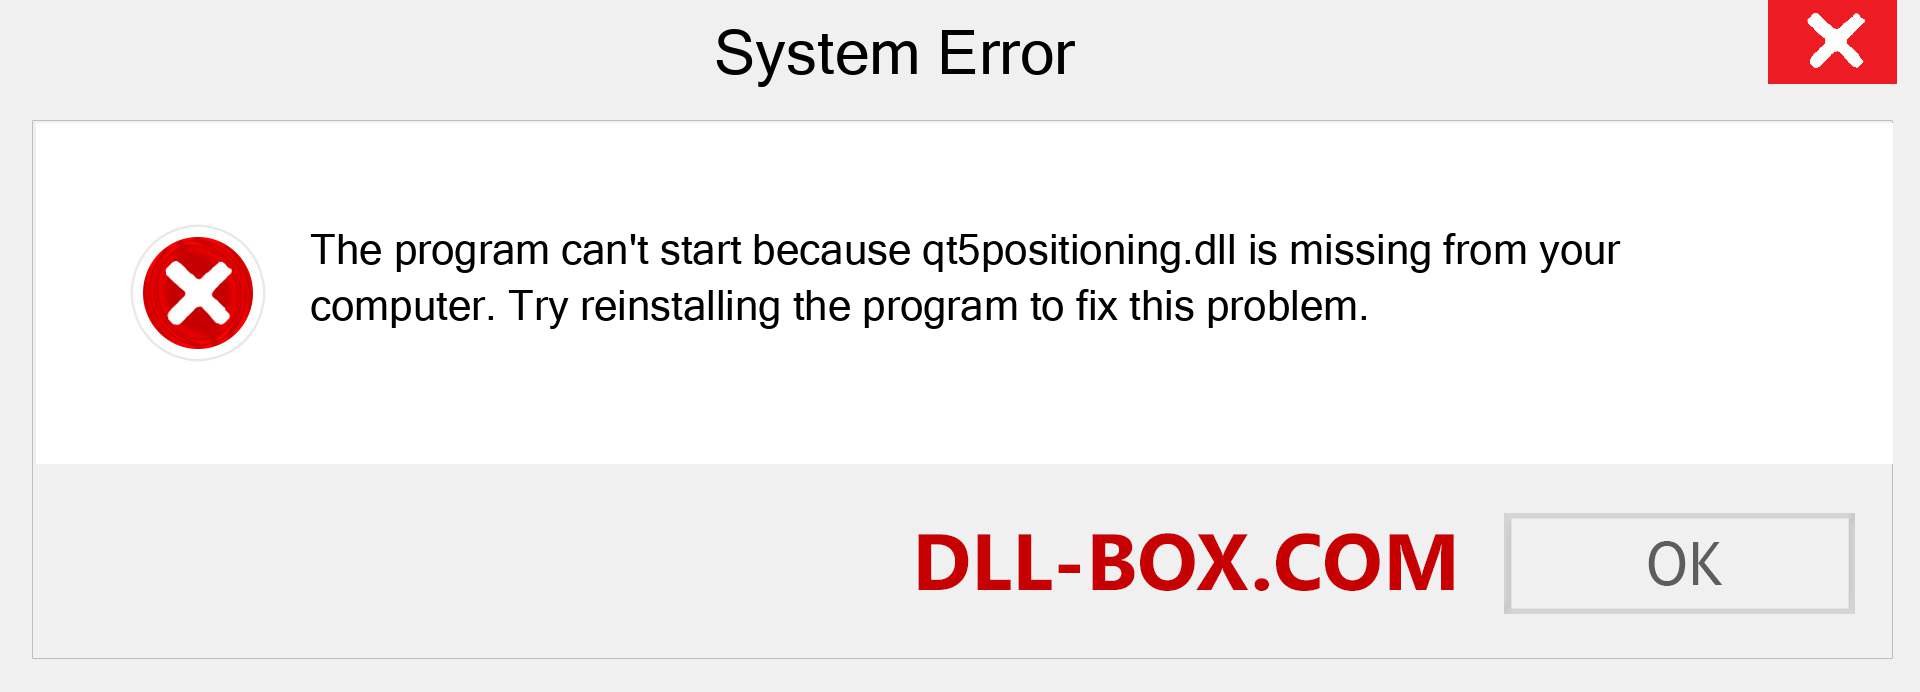  qt5positioning.dll file is missing?. Download for Windows 7, 8, 10 - Fix  qt5positioning dll Missing Error on Windows, photos, images